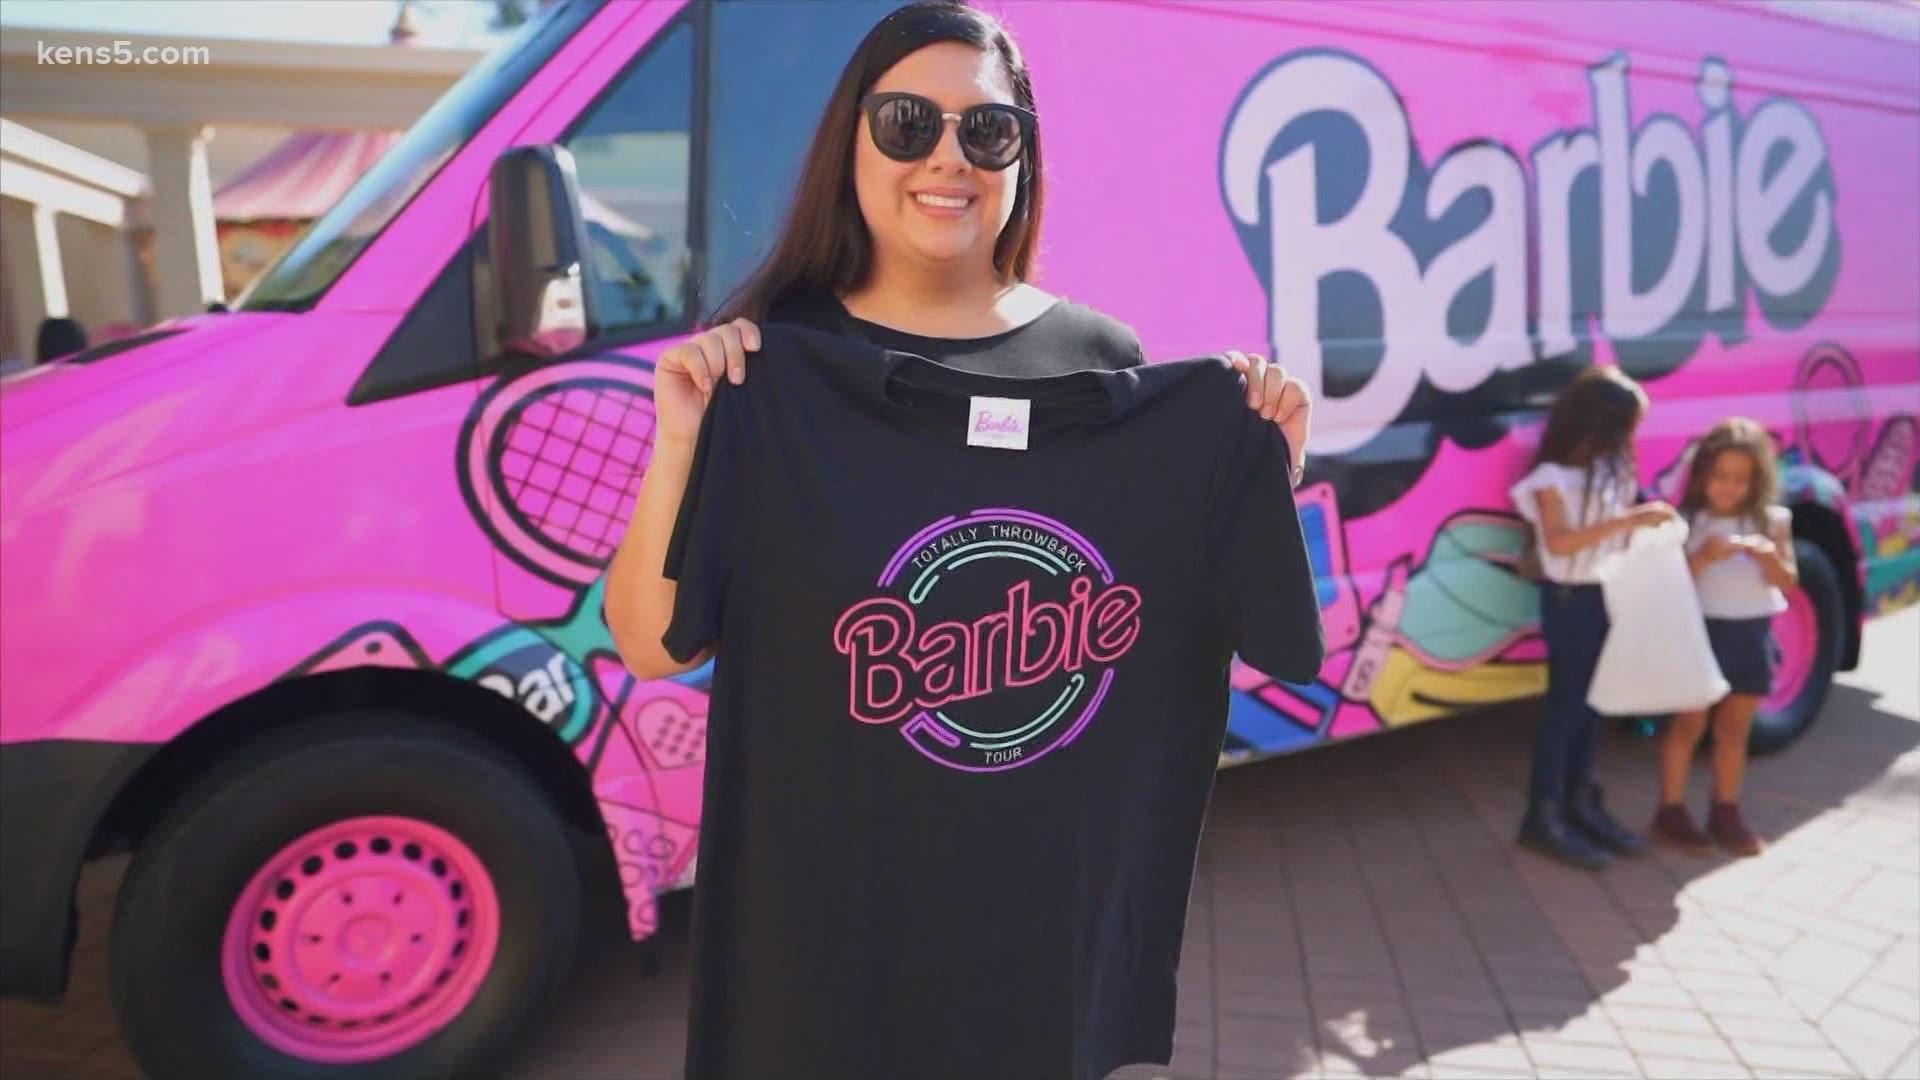 The Barbie Pop-Up Truck is stopping in San Antonio on its national tour Saturday.